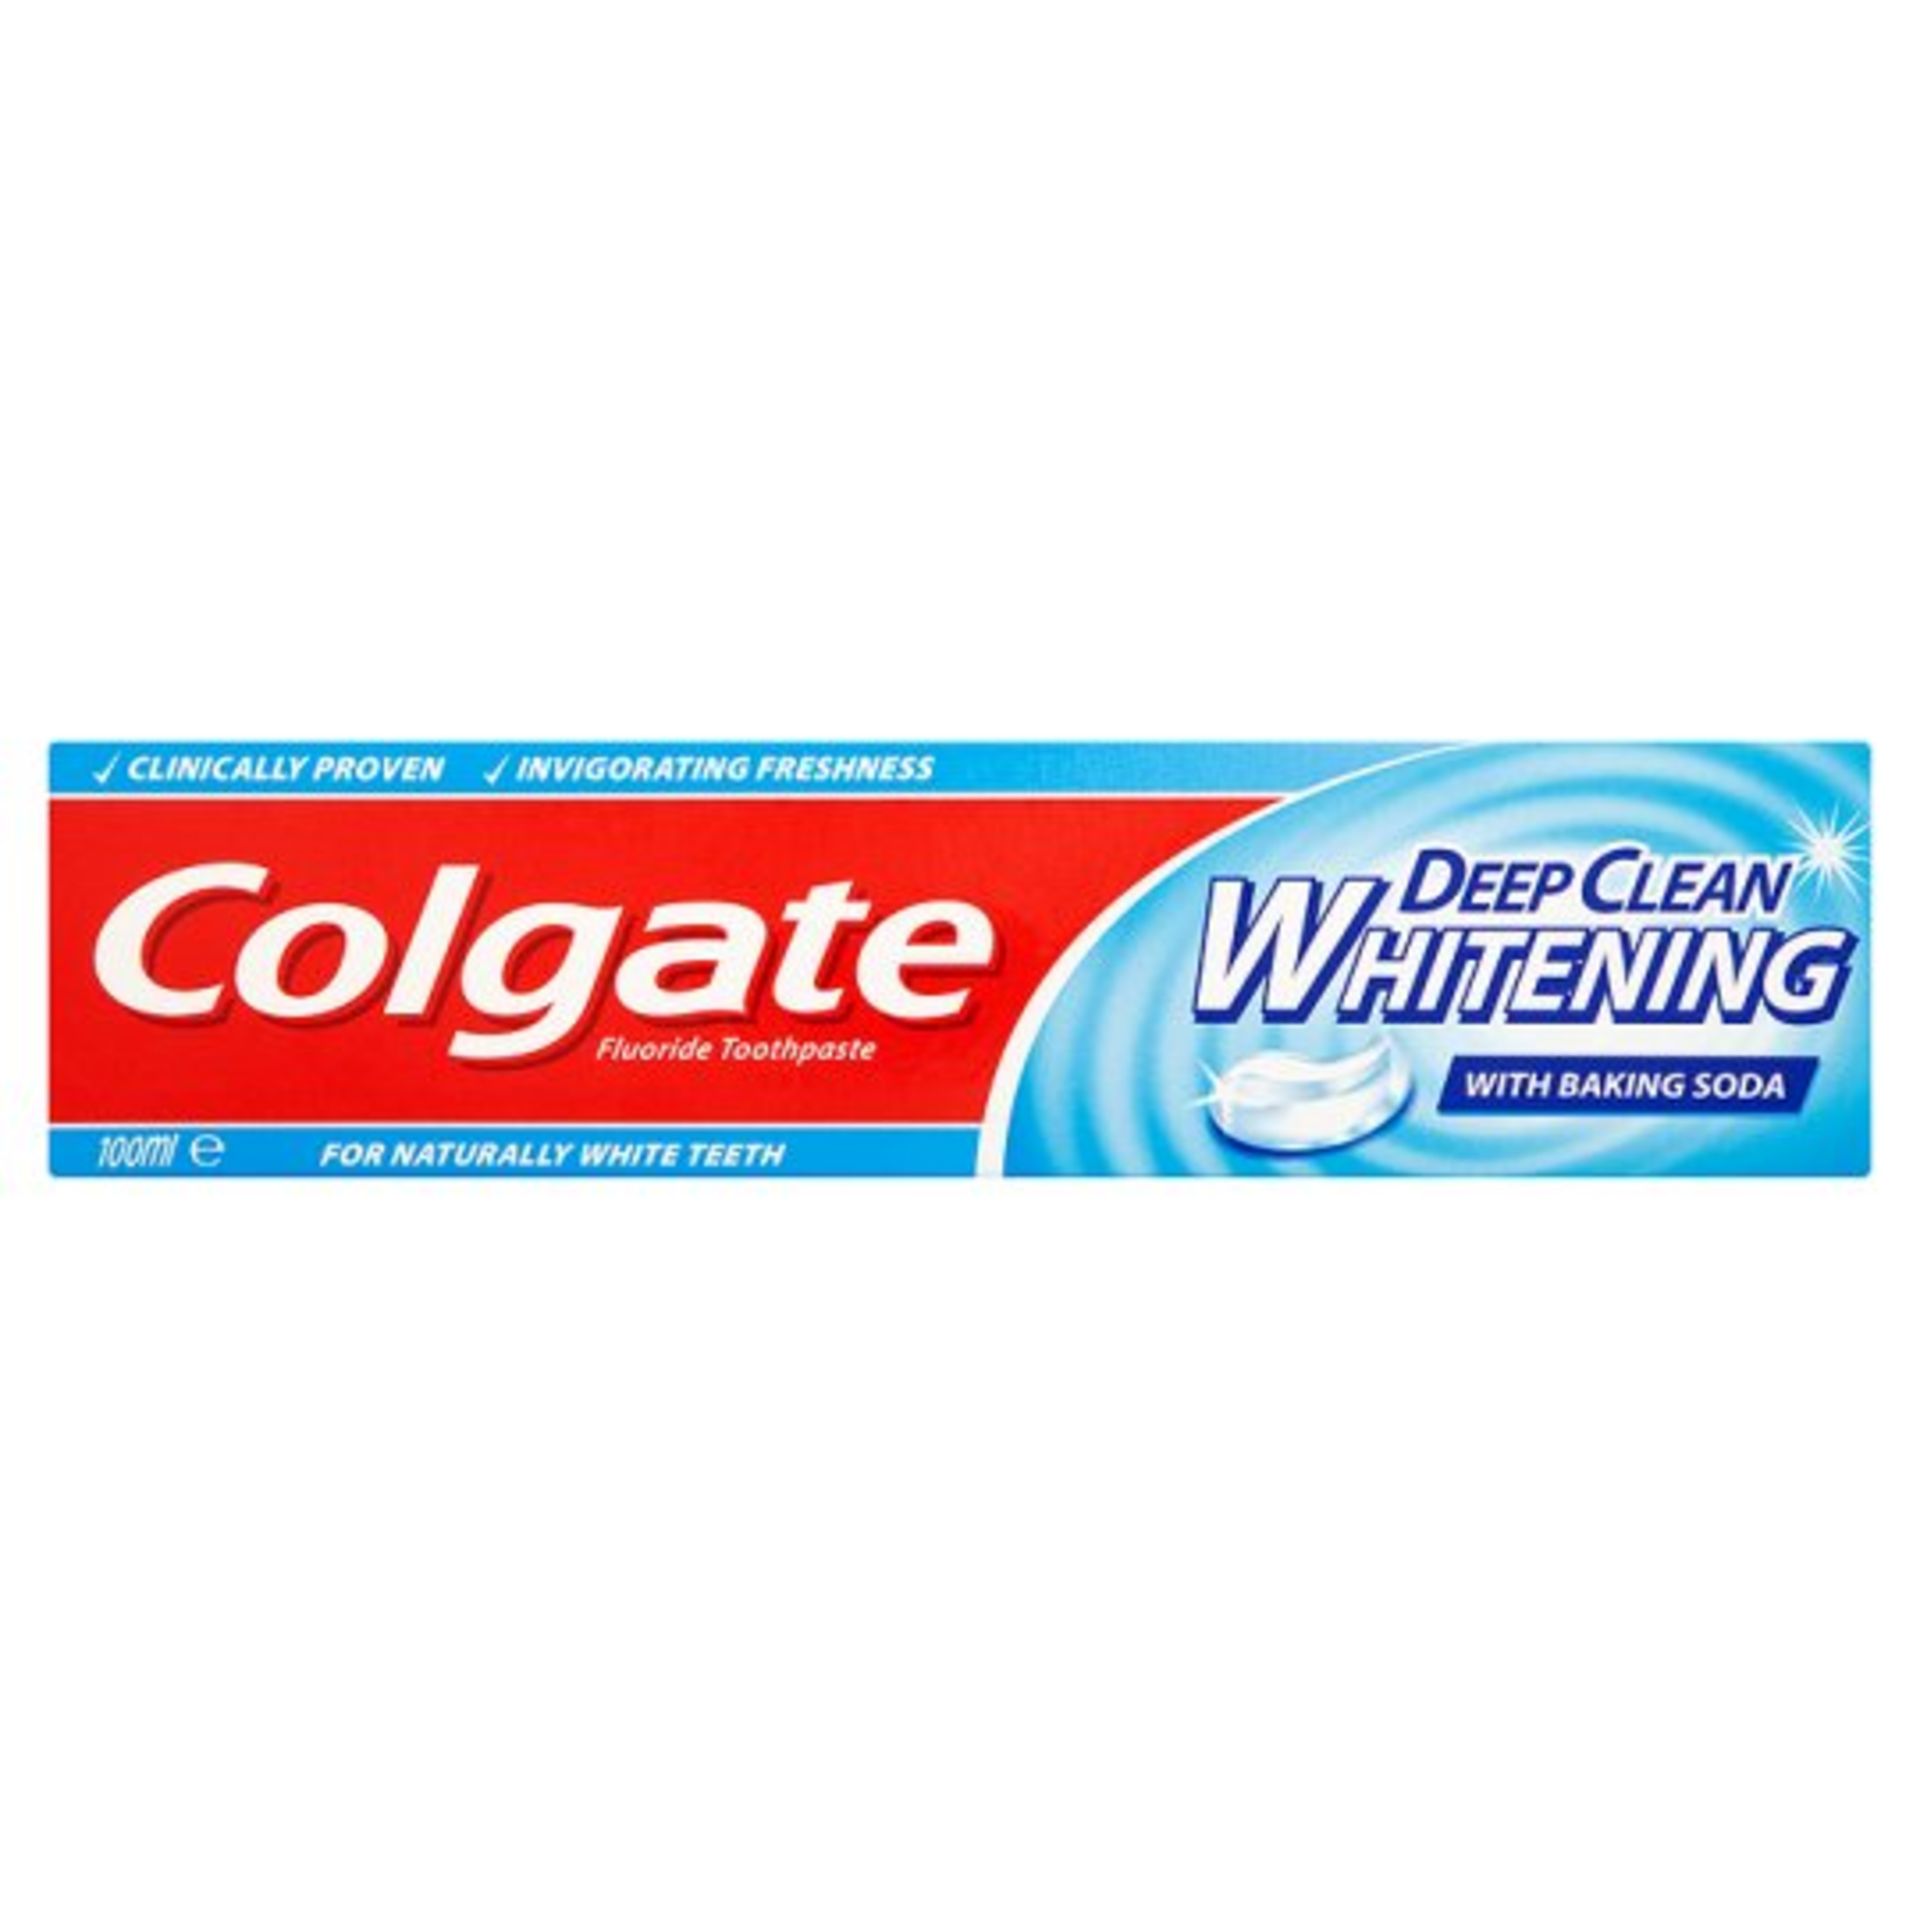 V Brand New 12 x Colgate Toothpaste Deep Clean Whitening 100ml Total Superdrug Price £12.38 X 2 YOUR - Image 2 of 2